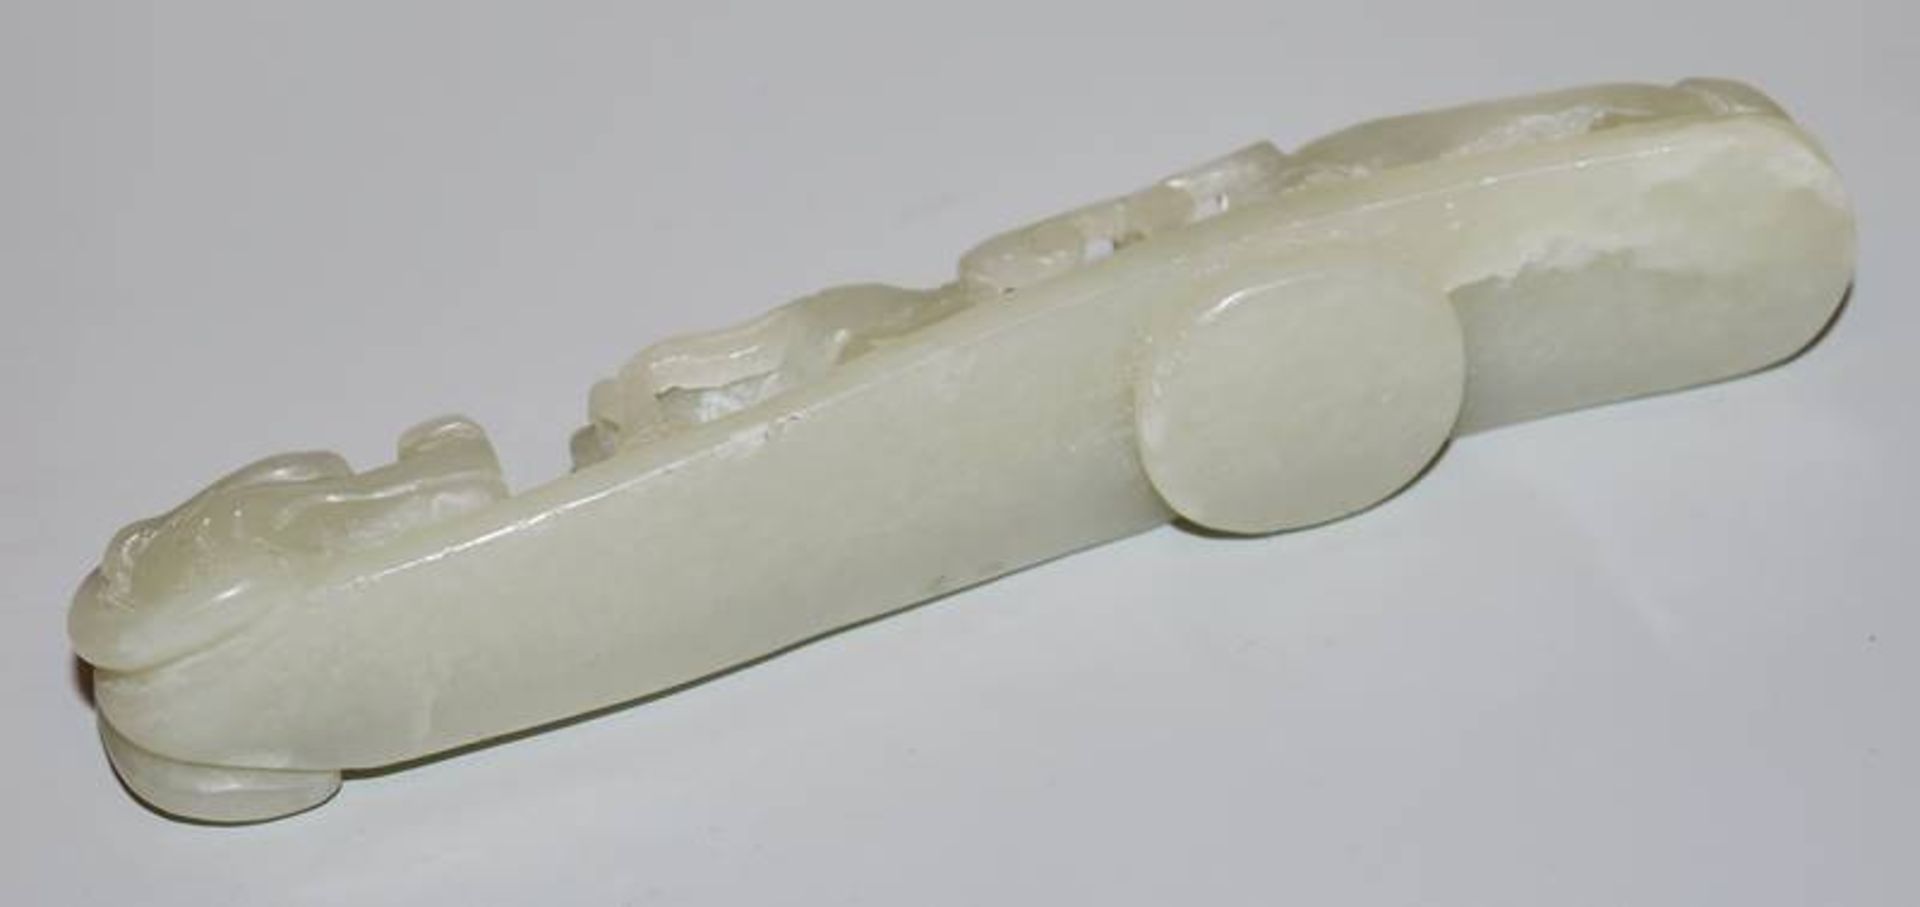 Jade belt hook, China, probably Qing period 18th/19th century - Image 3 of 3